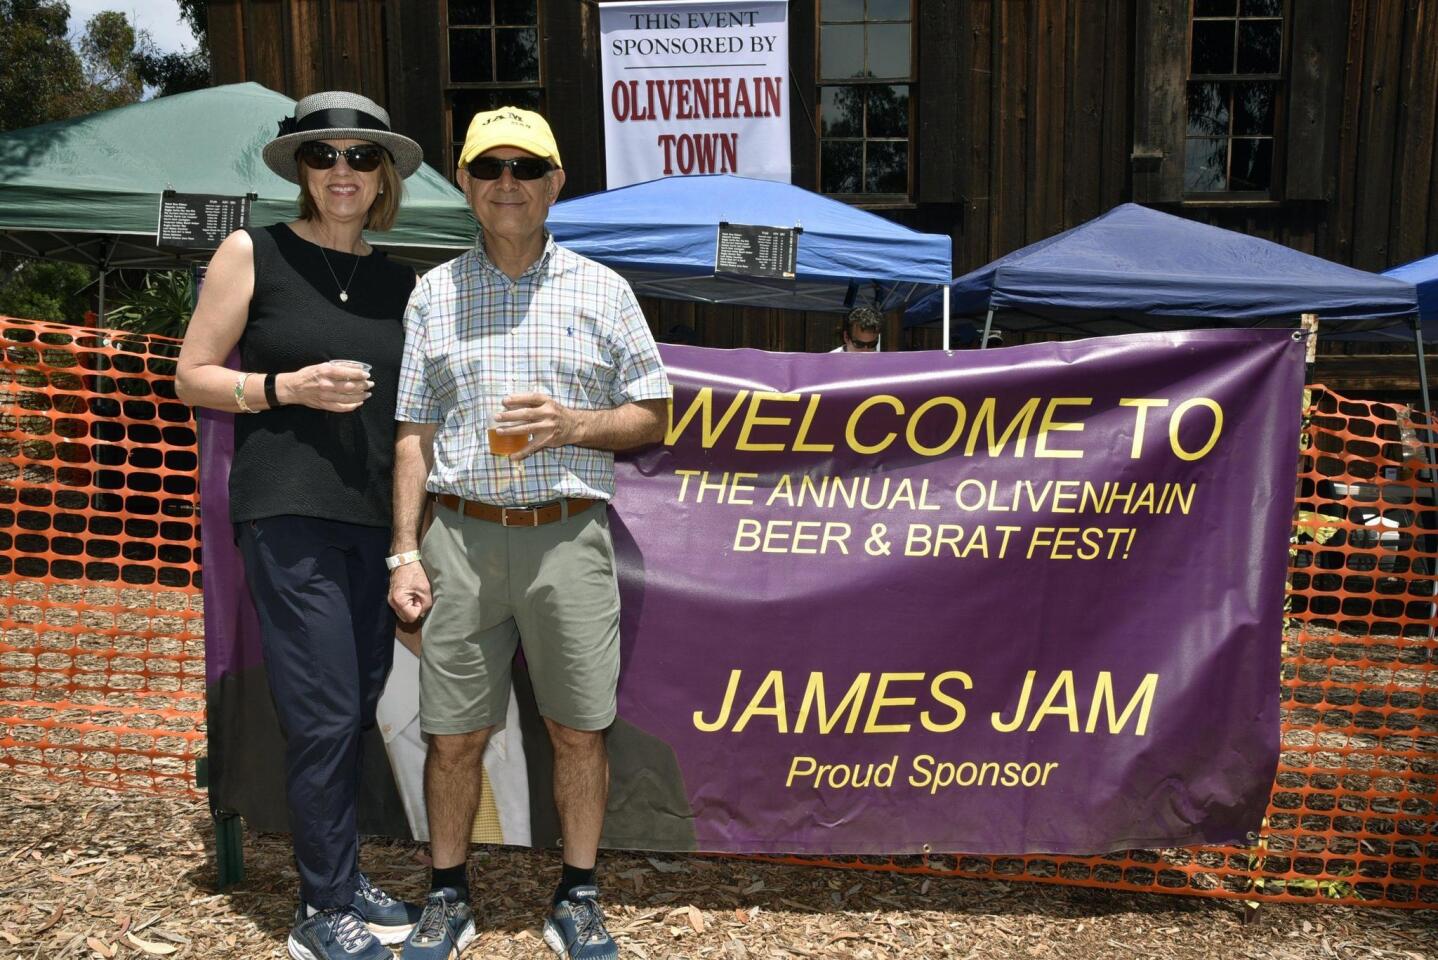 Event sponsors Mary and James Jam